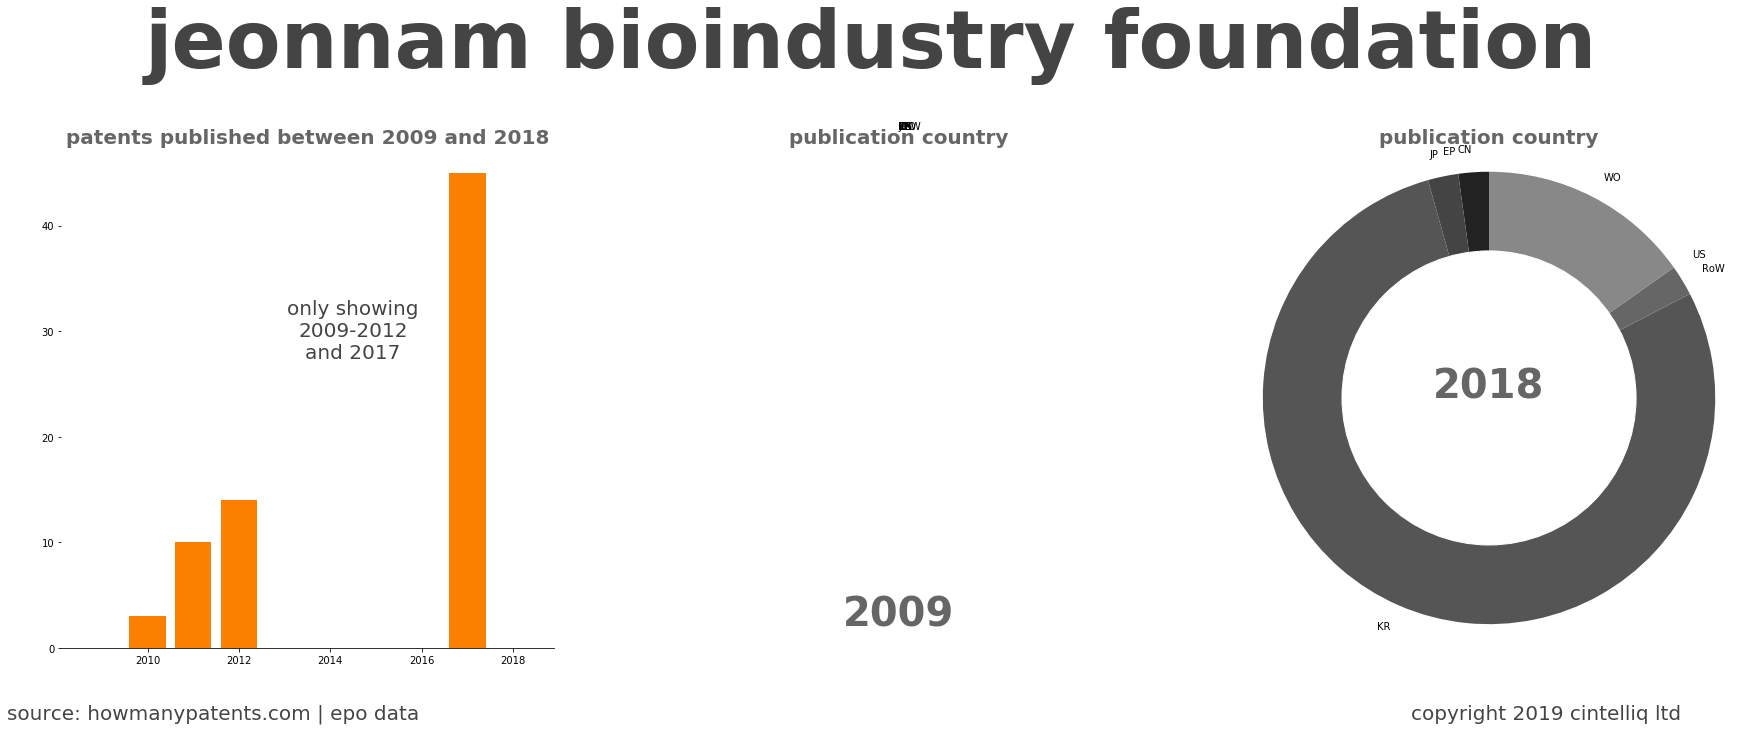 summary of patents for Jeonnam Bioindustry Foundation